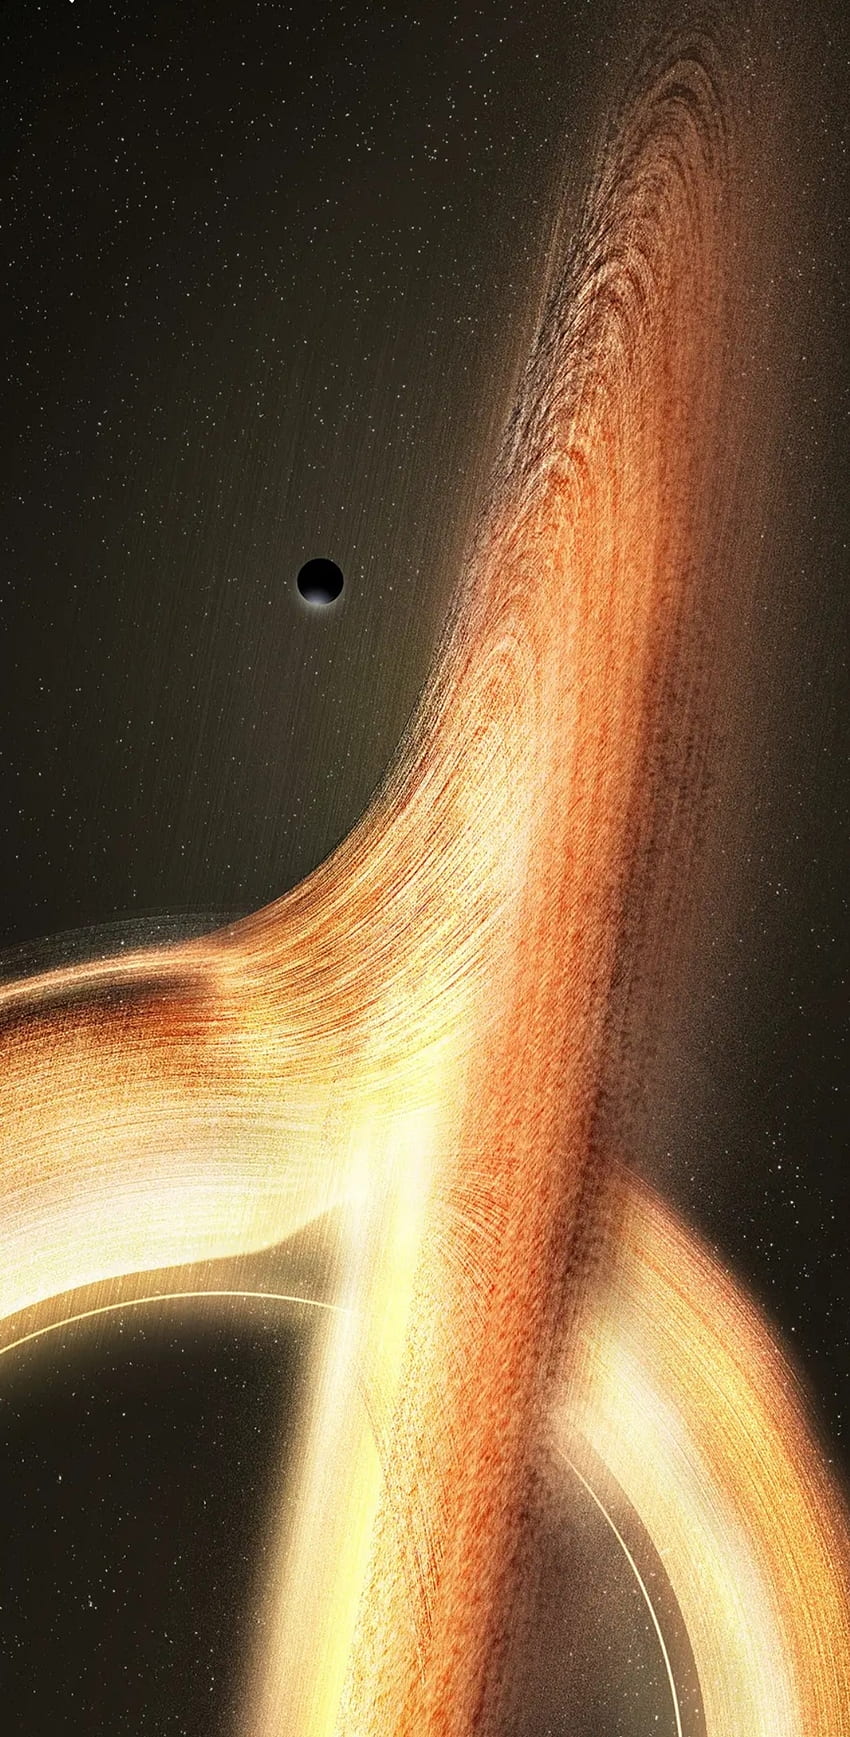 Supermassive black hole births new stars in charge across space